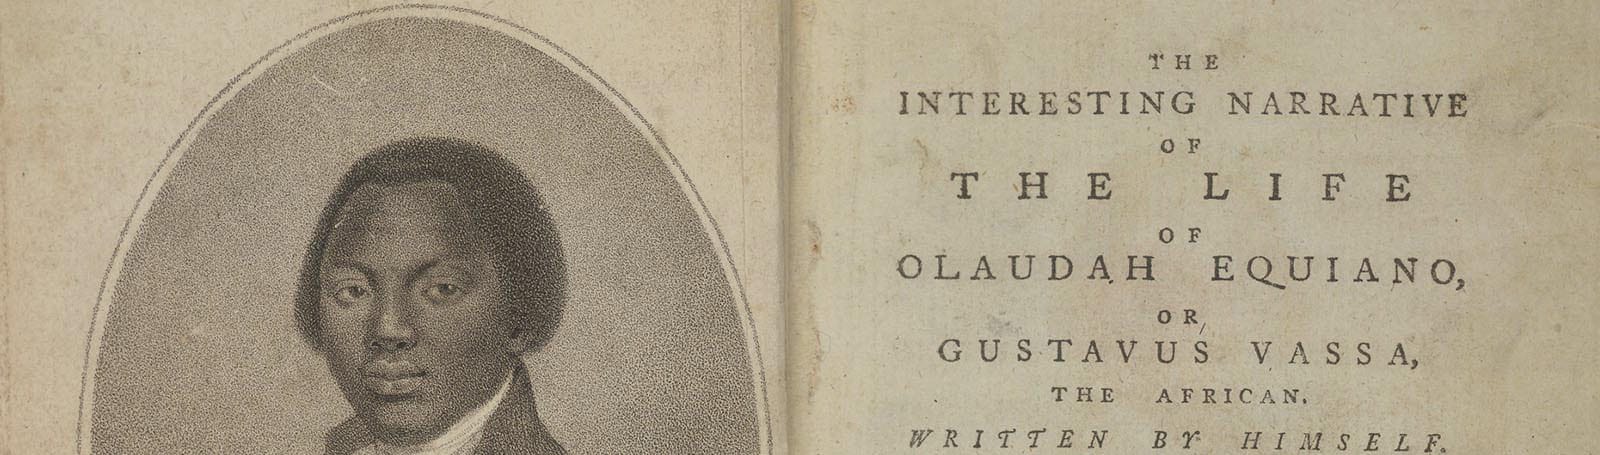 the interesting narrative of the life of olaudah equiano sparknotes